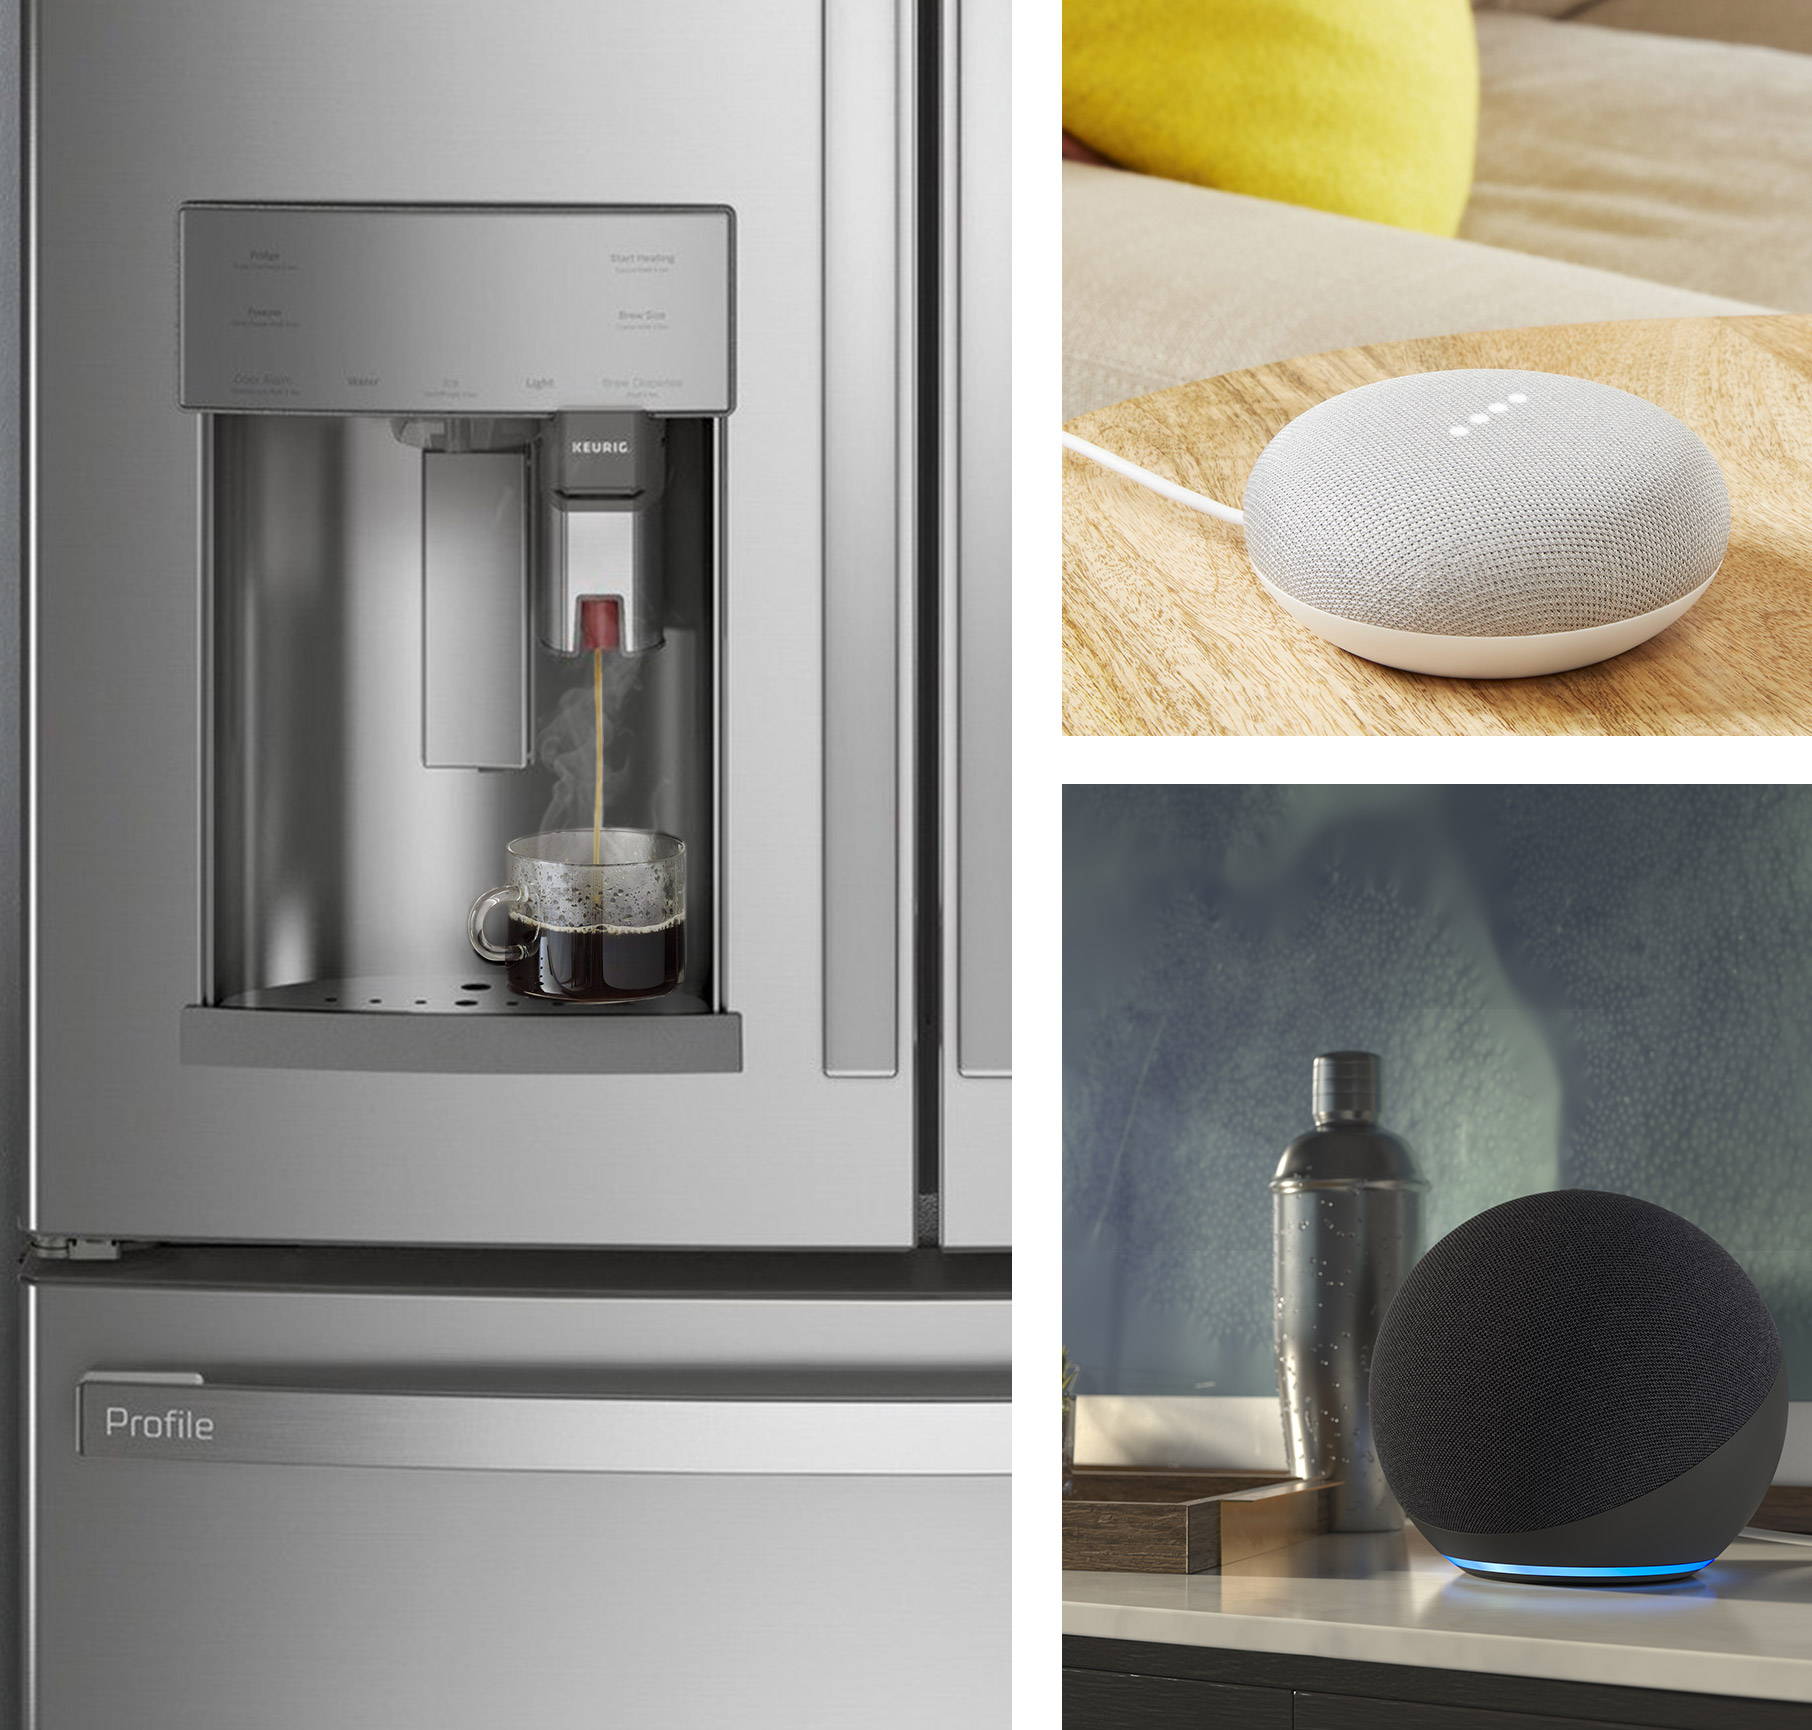 Grid image of refrigerator with k-cup, dispensing hot coffee,  Amazon echo dot and Google home smart assistants.